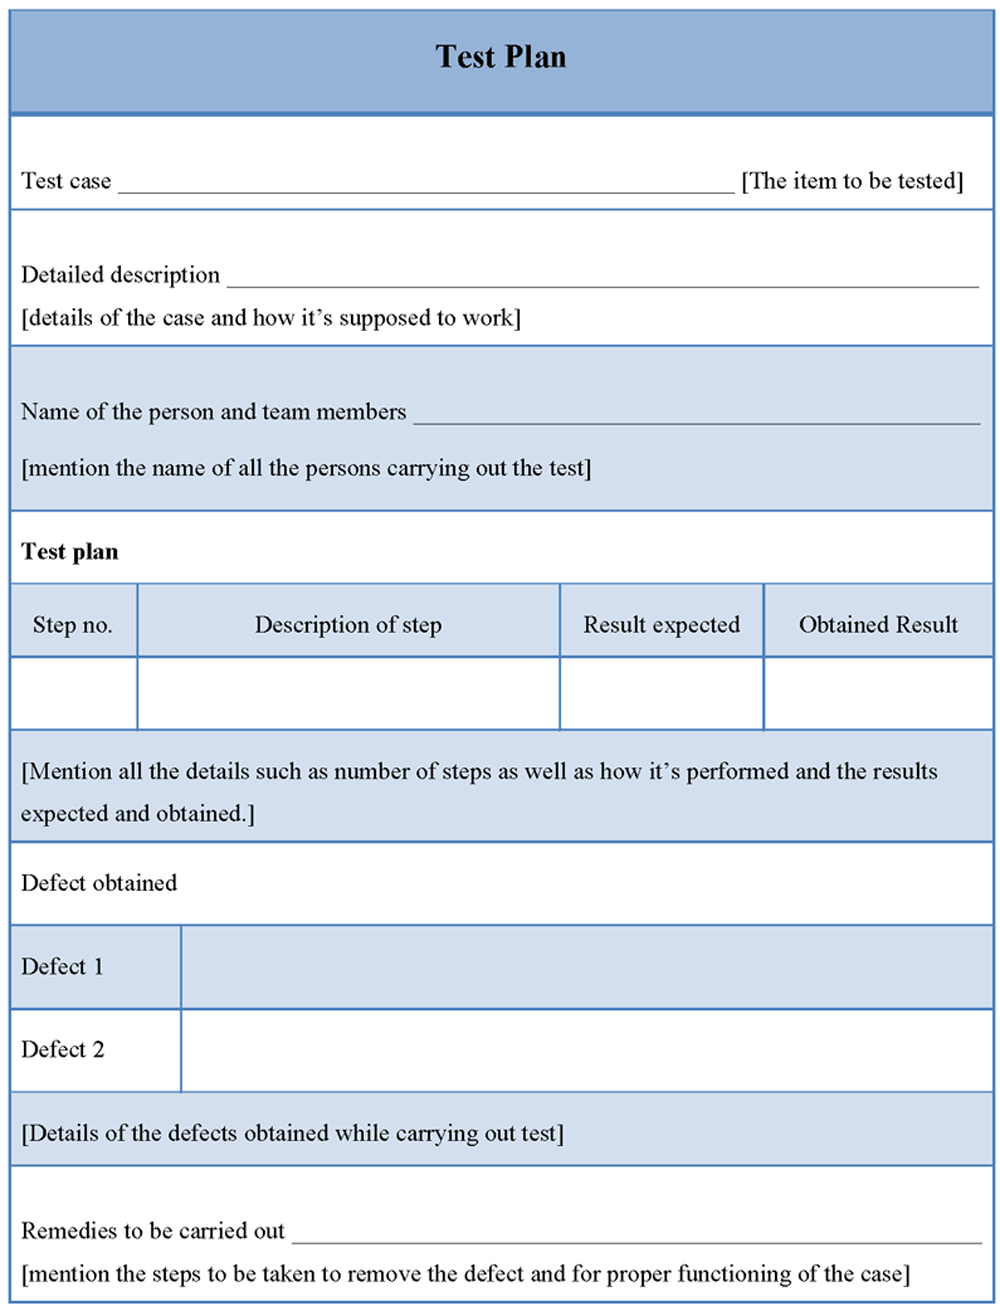 Test Plan Template Format, Sample Of Test Plan Template Within Test Template For Word